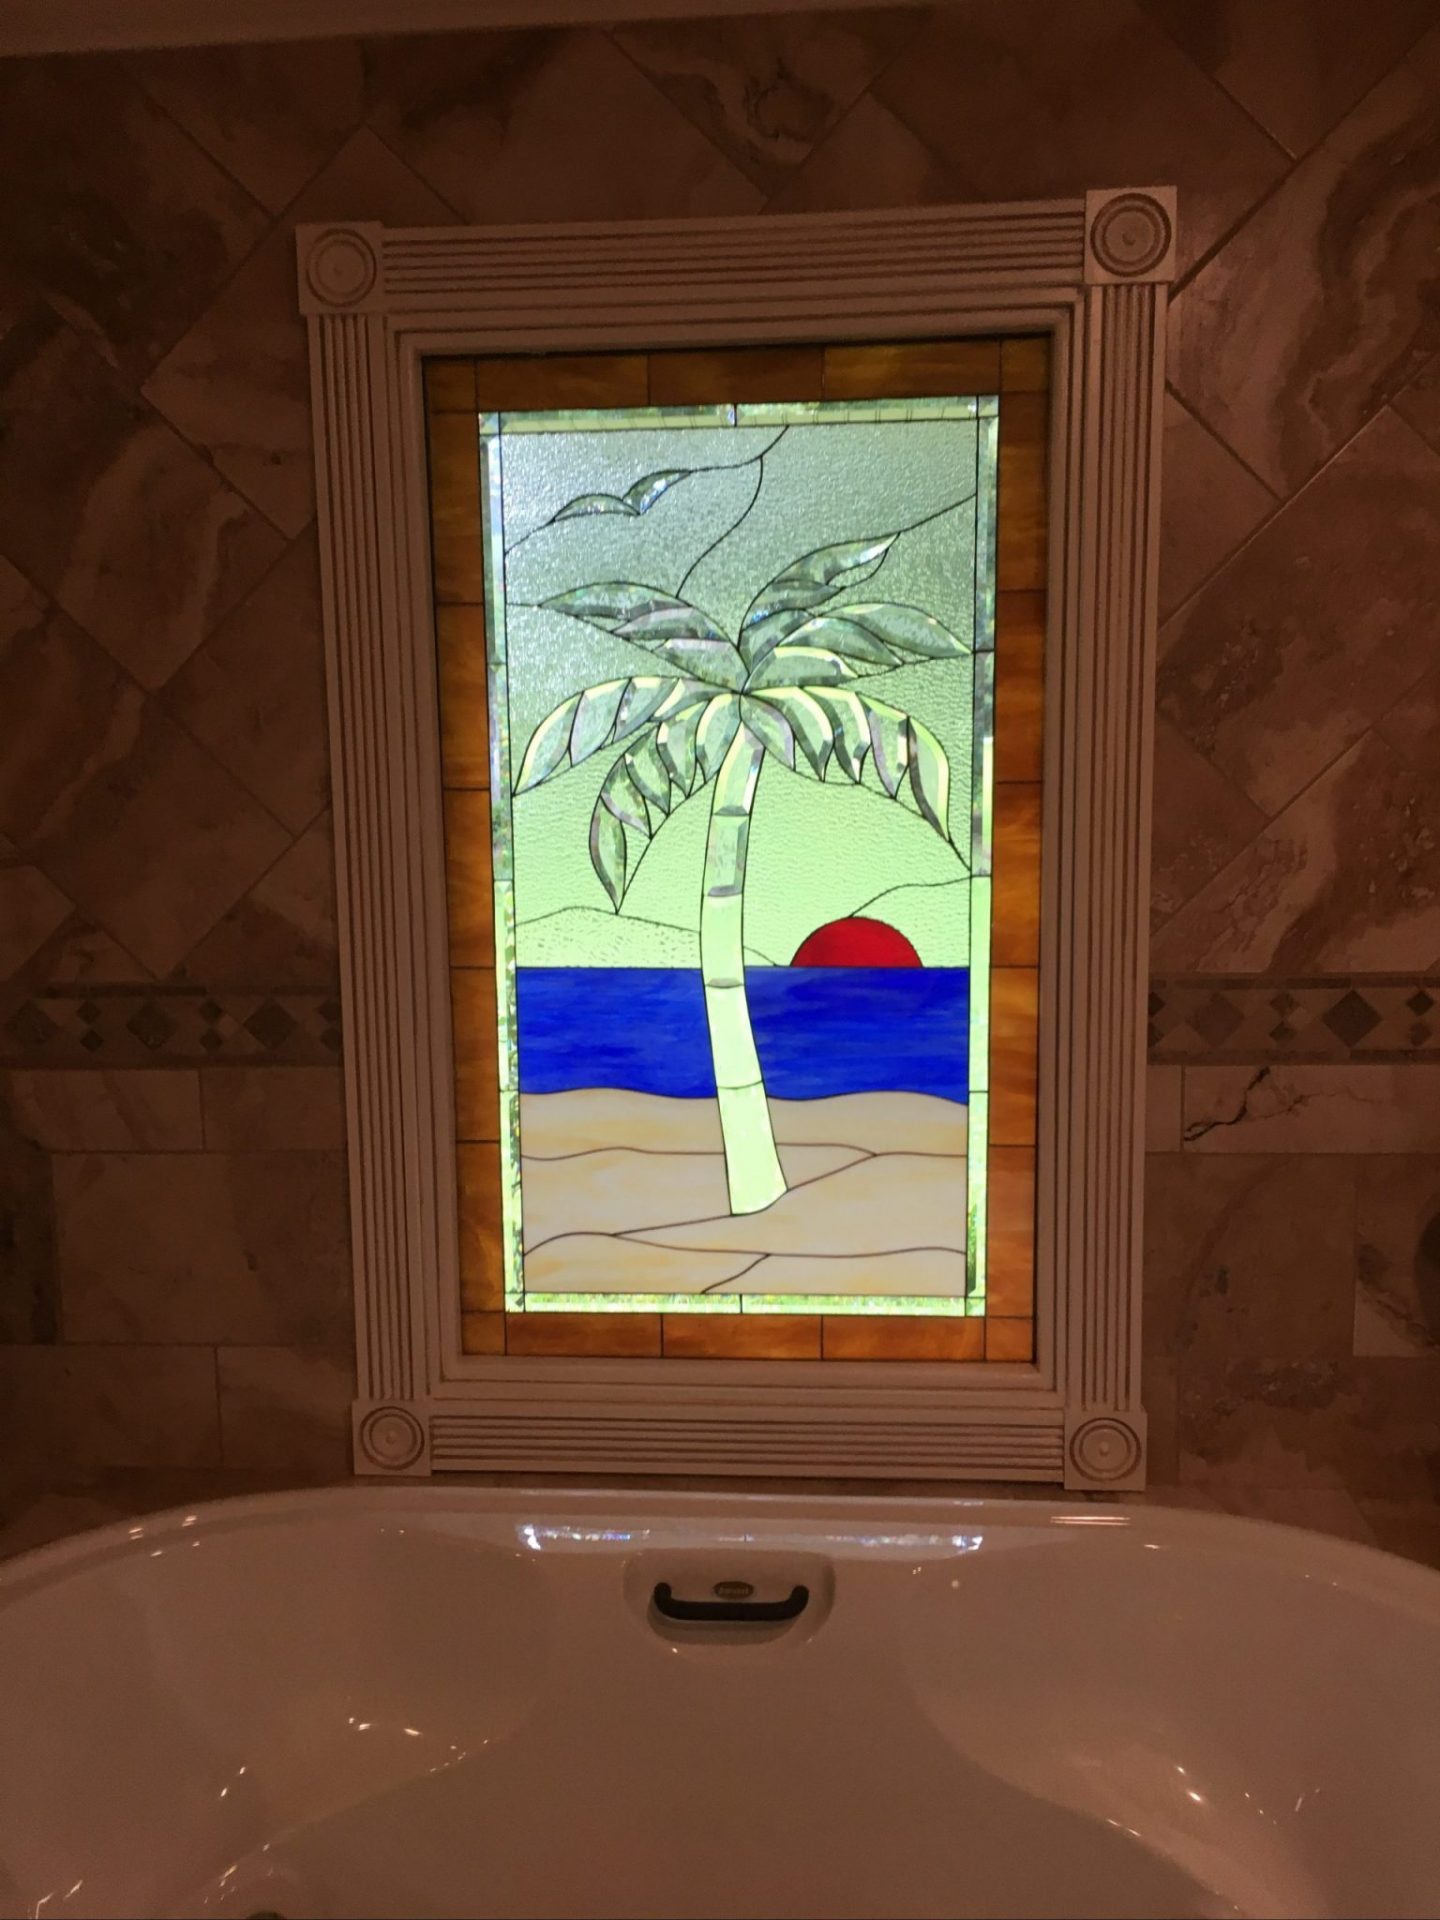 Exquisite Palm Tree Stained Glass Window Installed Over Bathtub